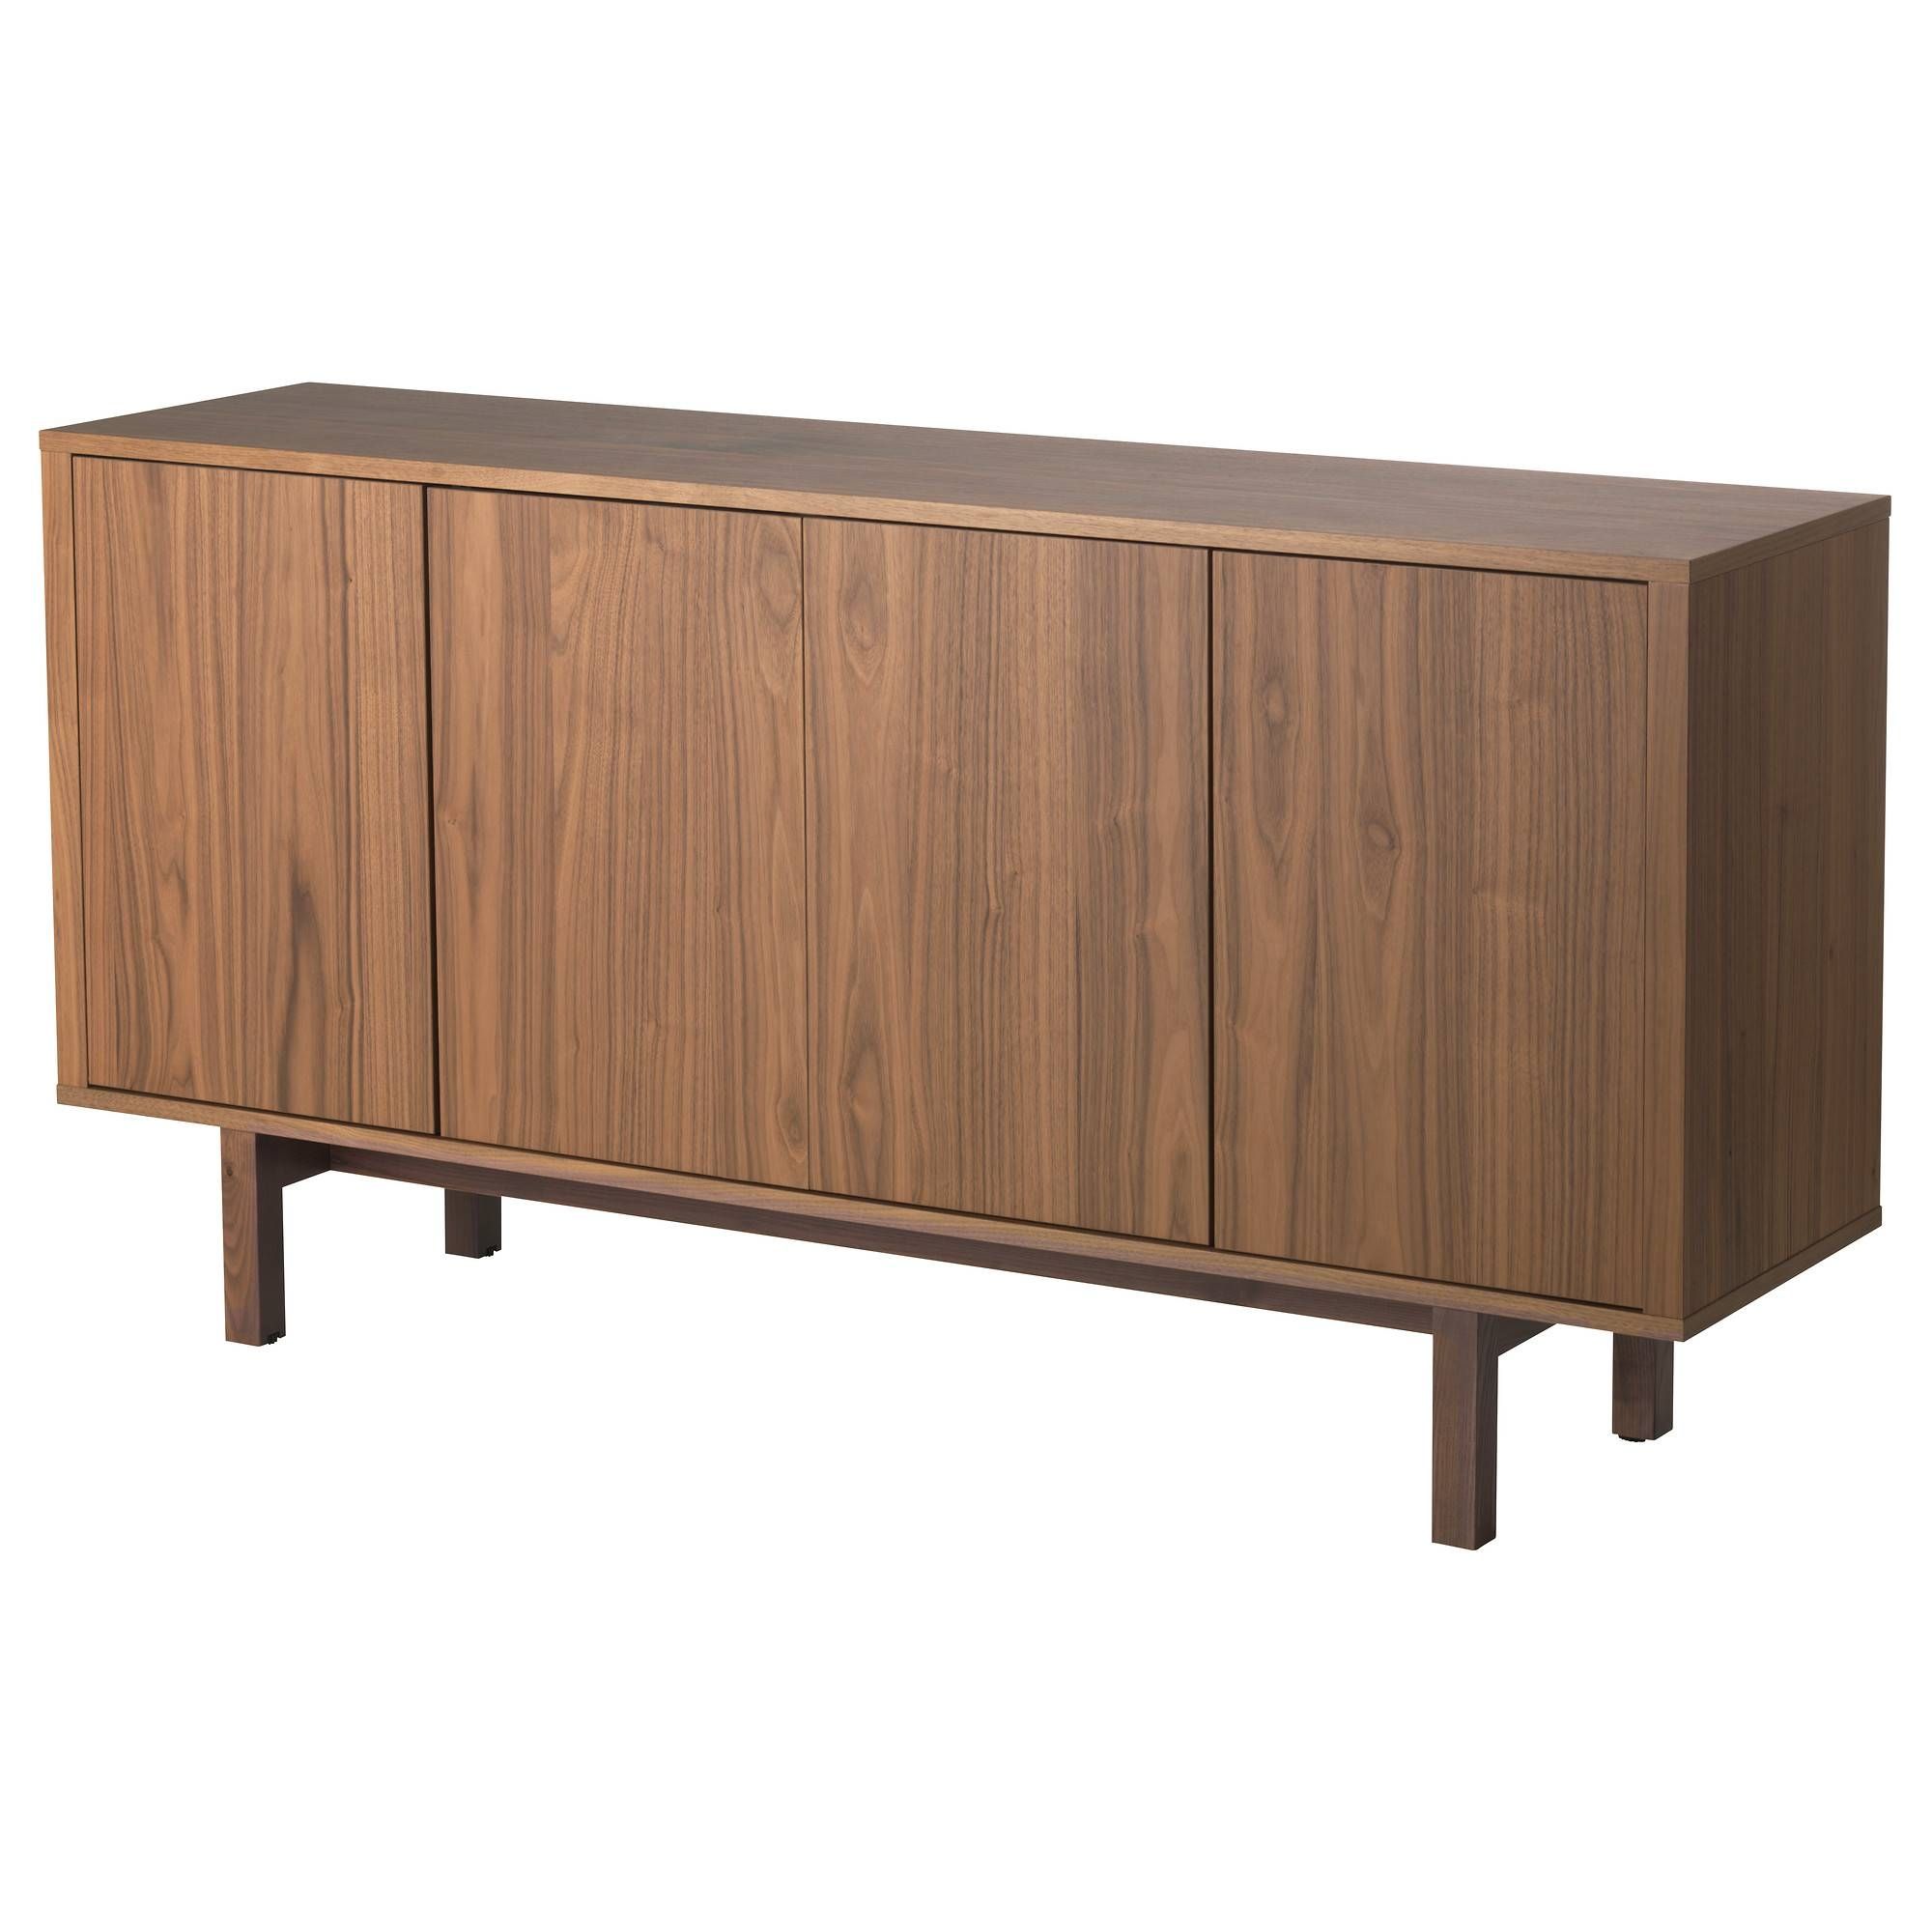 Stockholm Sideboard – Ikea Within Most Popular Sideboards And Buffets (View 9 of 15)